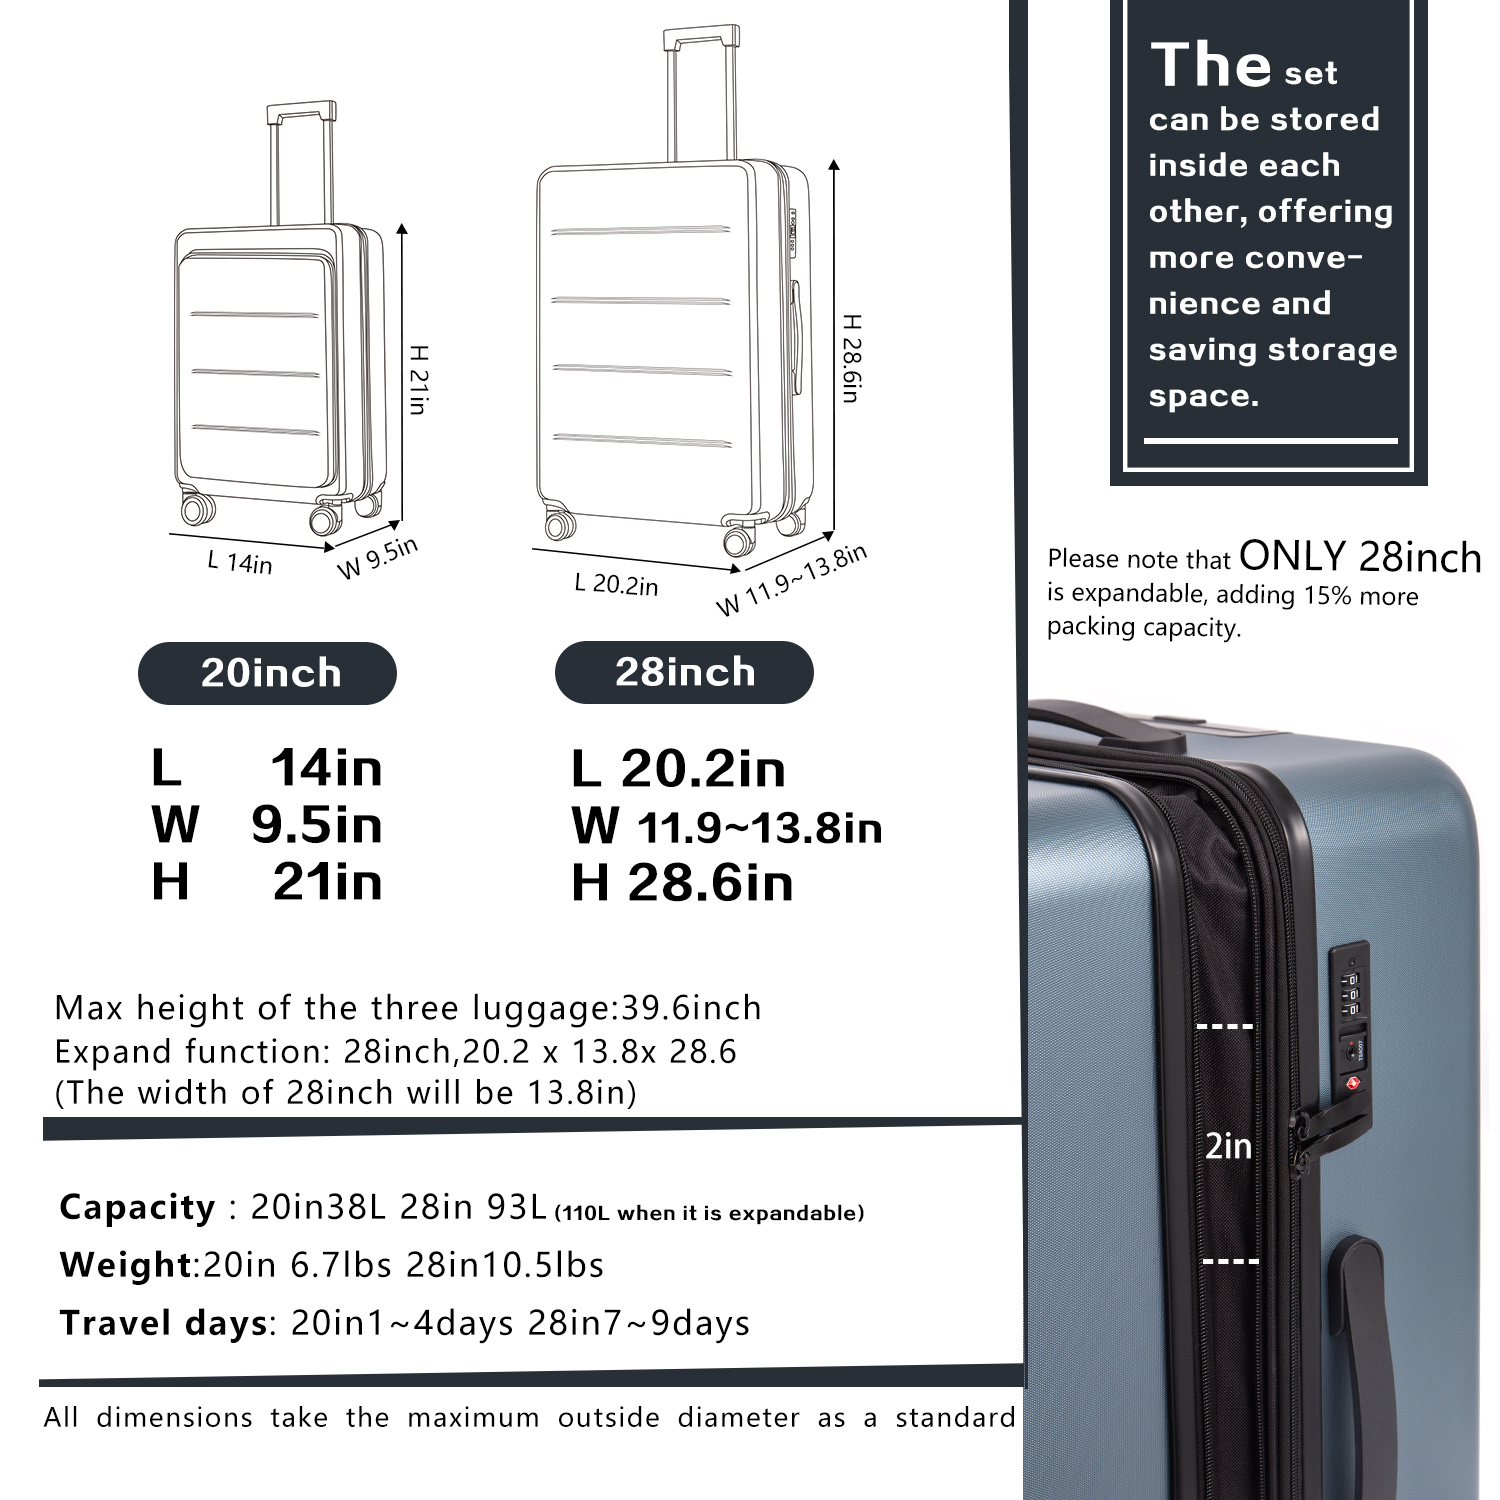 COOLIFE Luggage Suitcase Piece Set Carry On ABS+PC Spinner Trolley with pocket Compartmnet Weekend Bag  YD76S